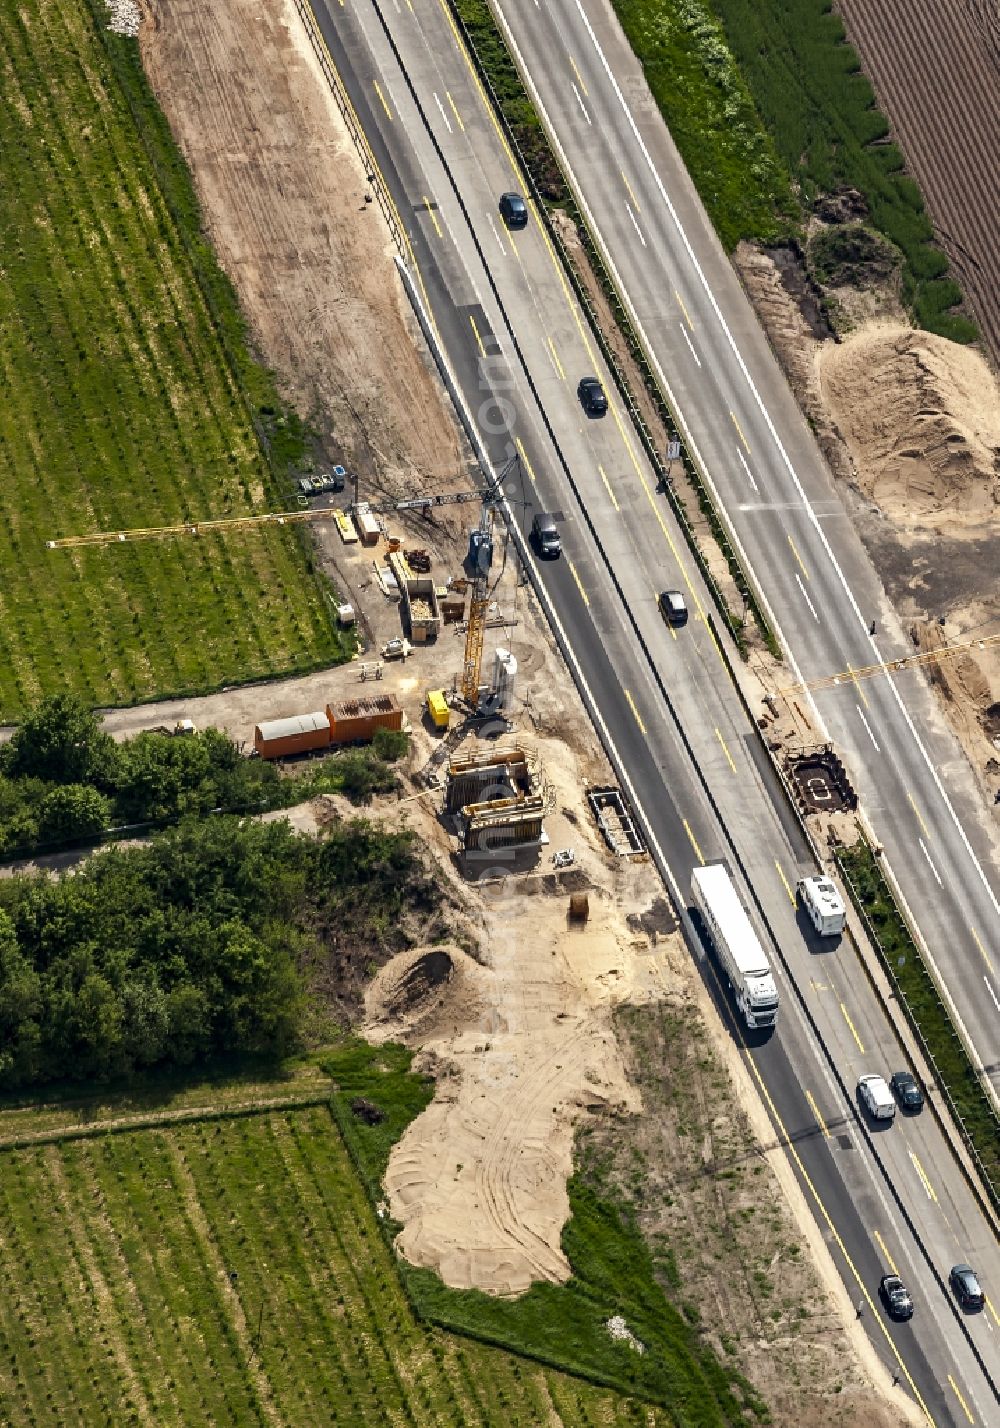 Aerial photograph Padenstedt - Construction site for the new building of Routing and traffic lanes over the highway bridge in the motorway A 7 in Padenstedt in the state Schleswig-Holstein, Germany